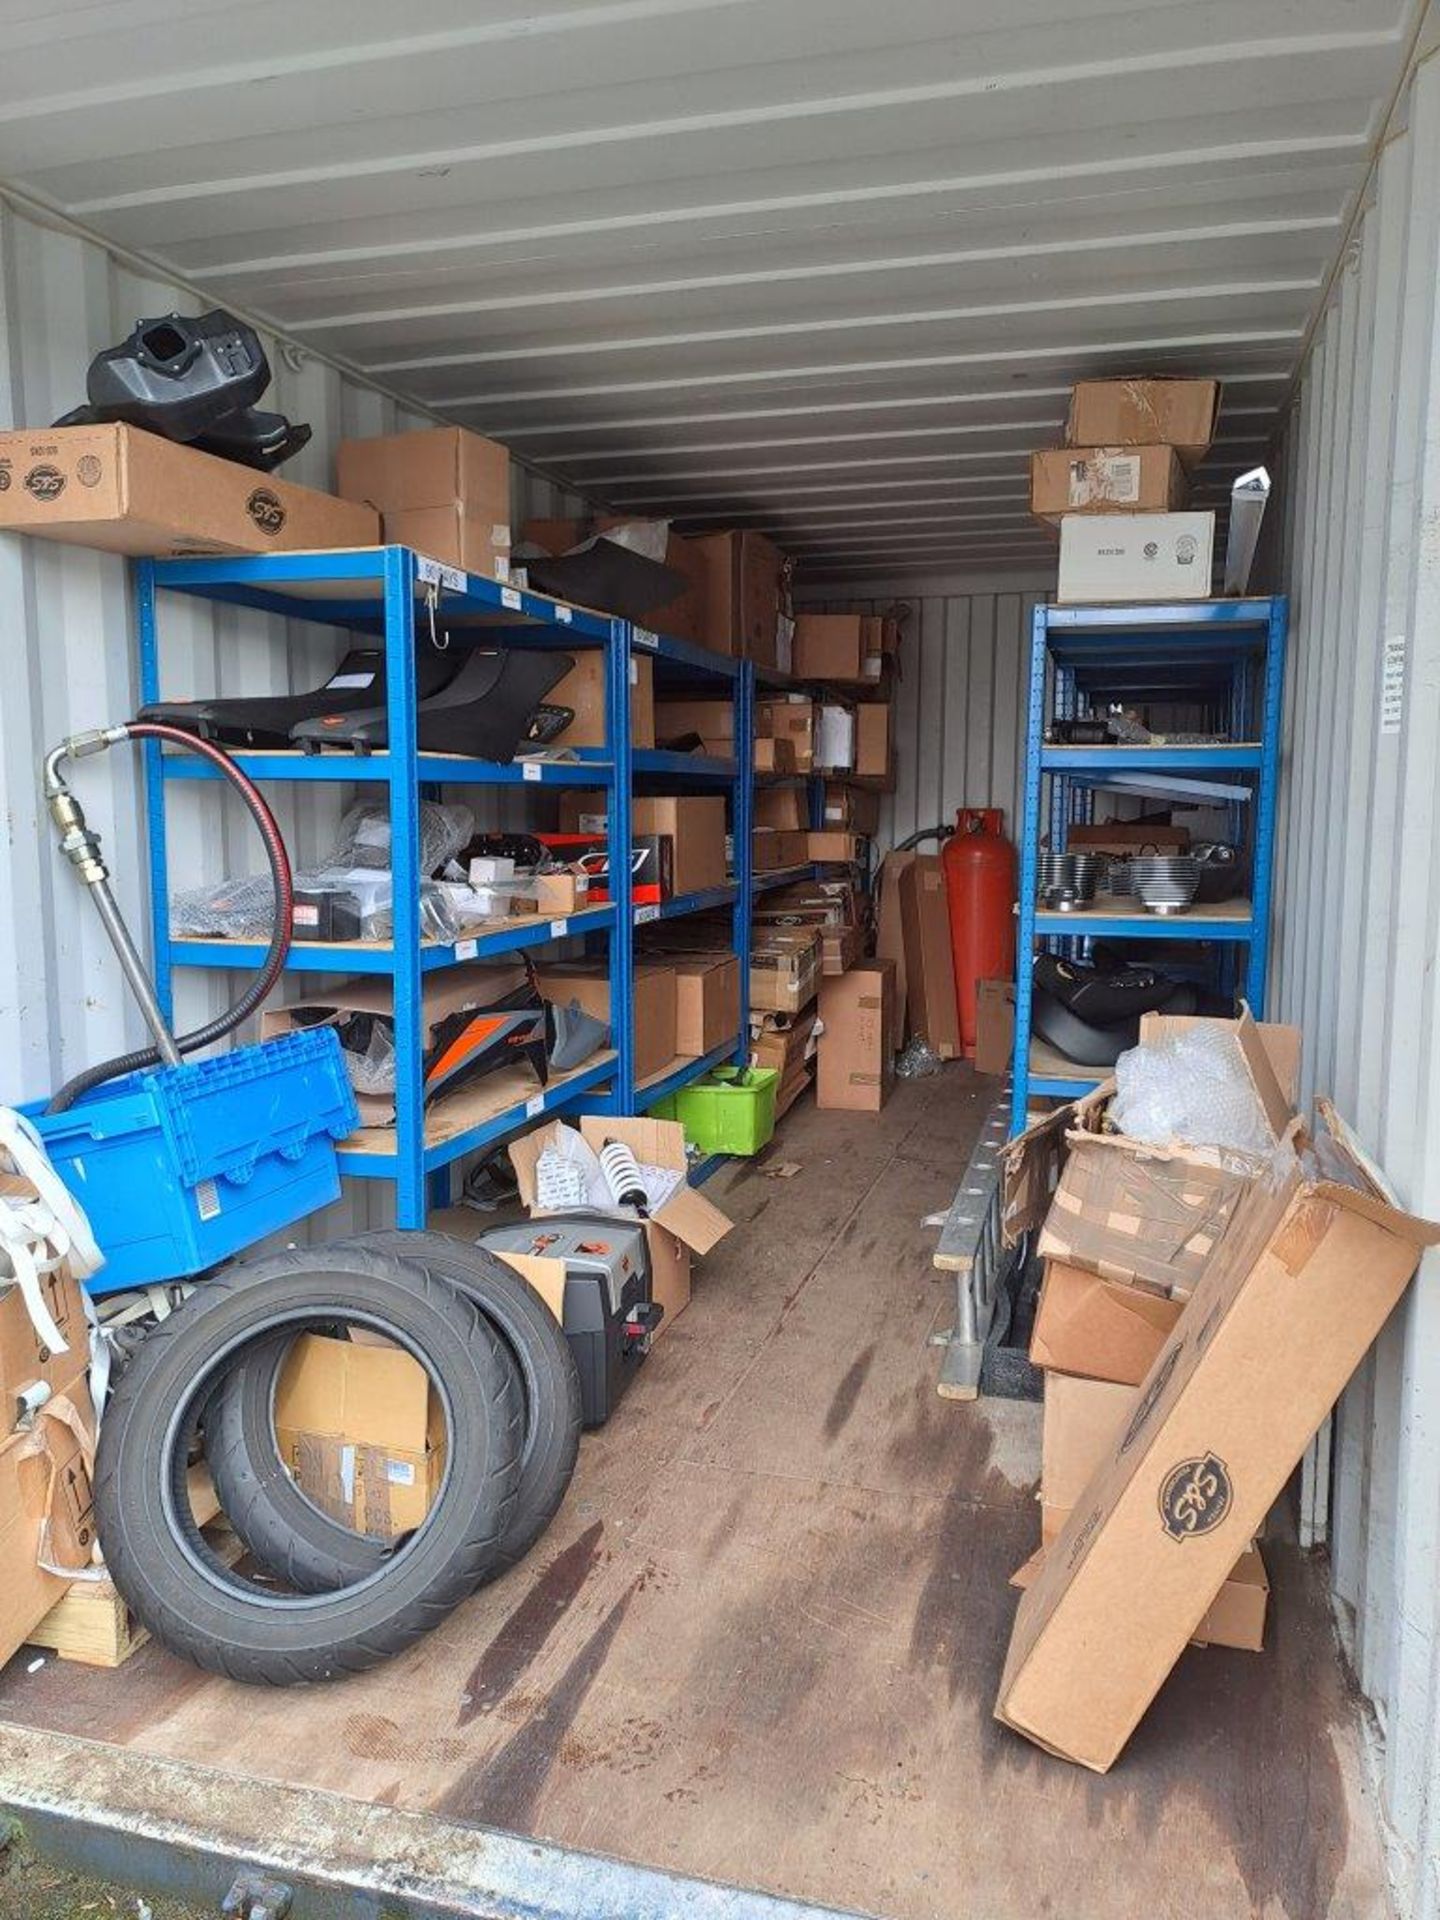 Contents of shipping container - Image 2 of 20